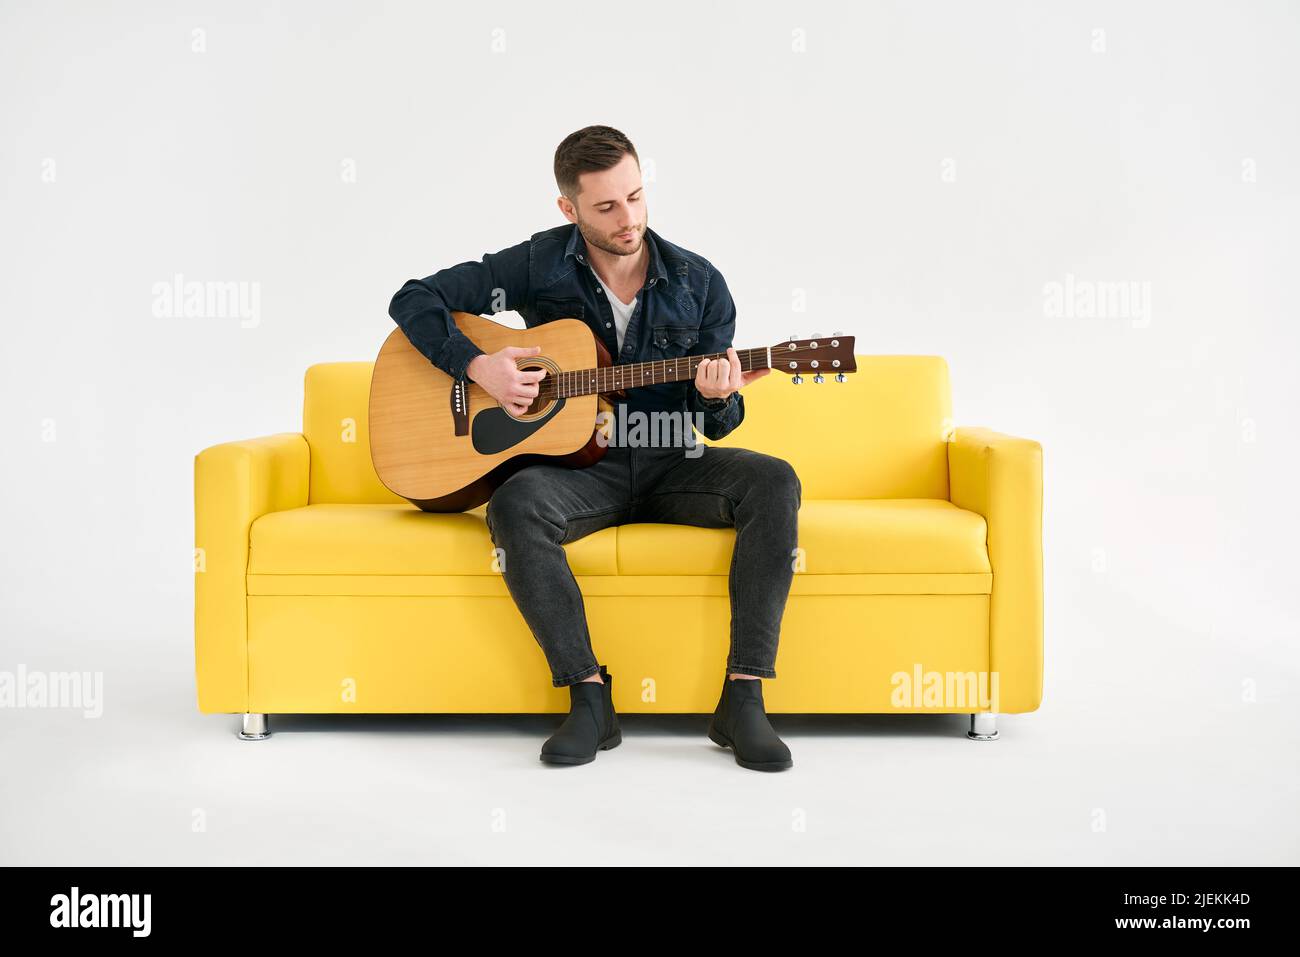 Handsome young man playing acoustic guitar whlile sitting on yellow sofa over white background. Hobby, music concept Stock Photo